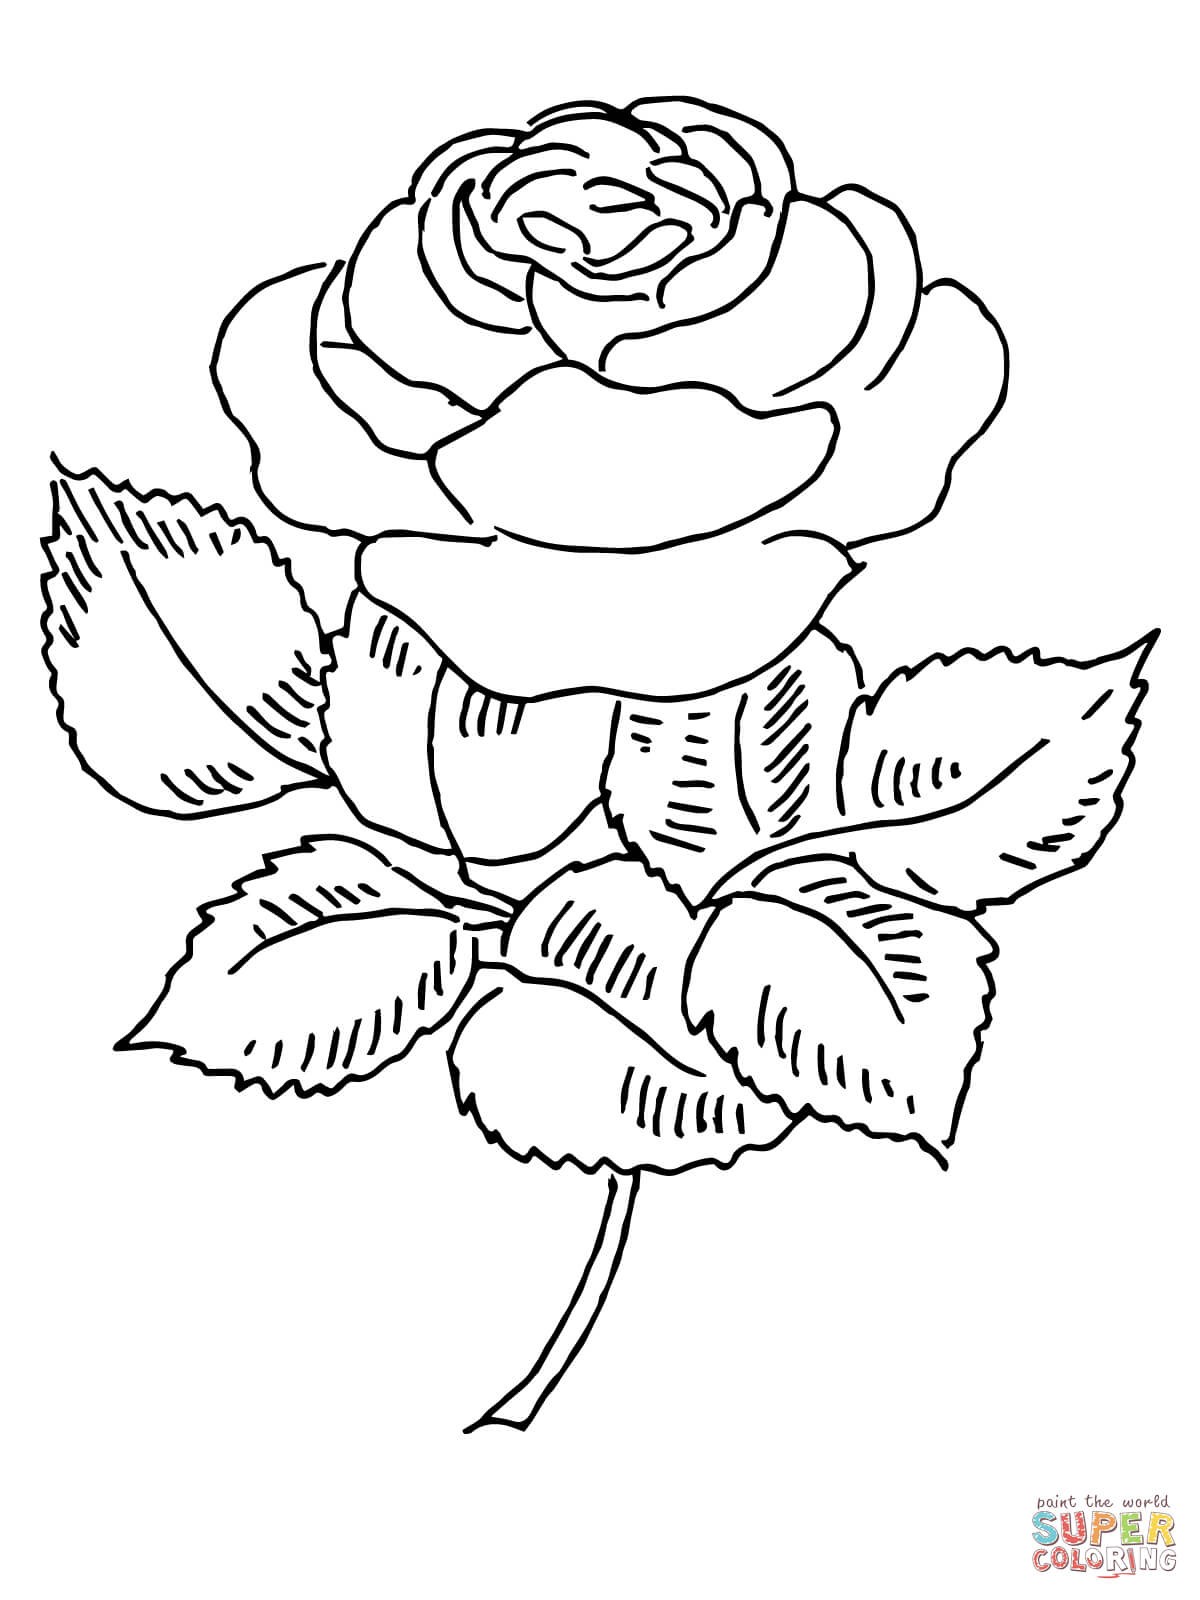 Rose Bud Coloring Pages at GetColorings.com | Free printable colorings ...